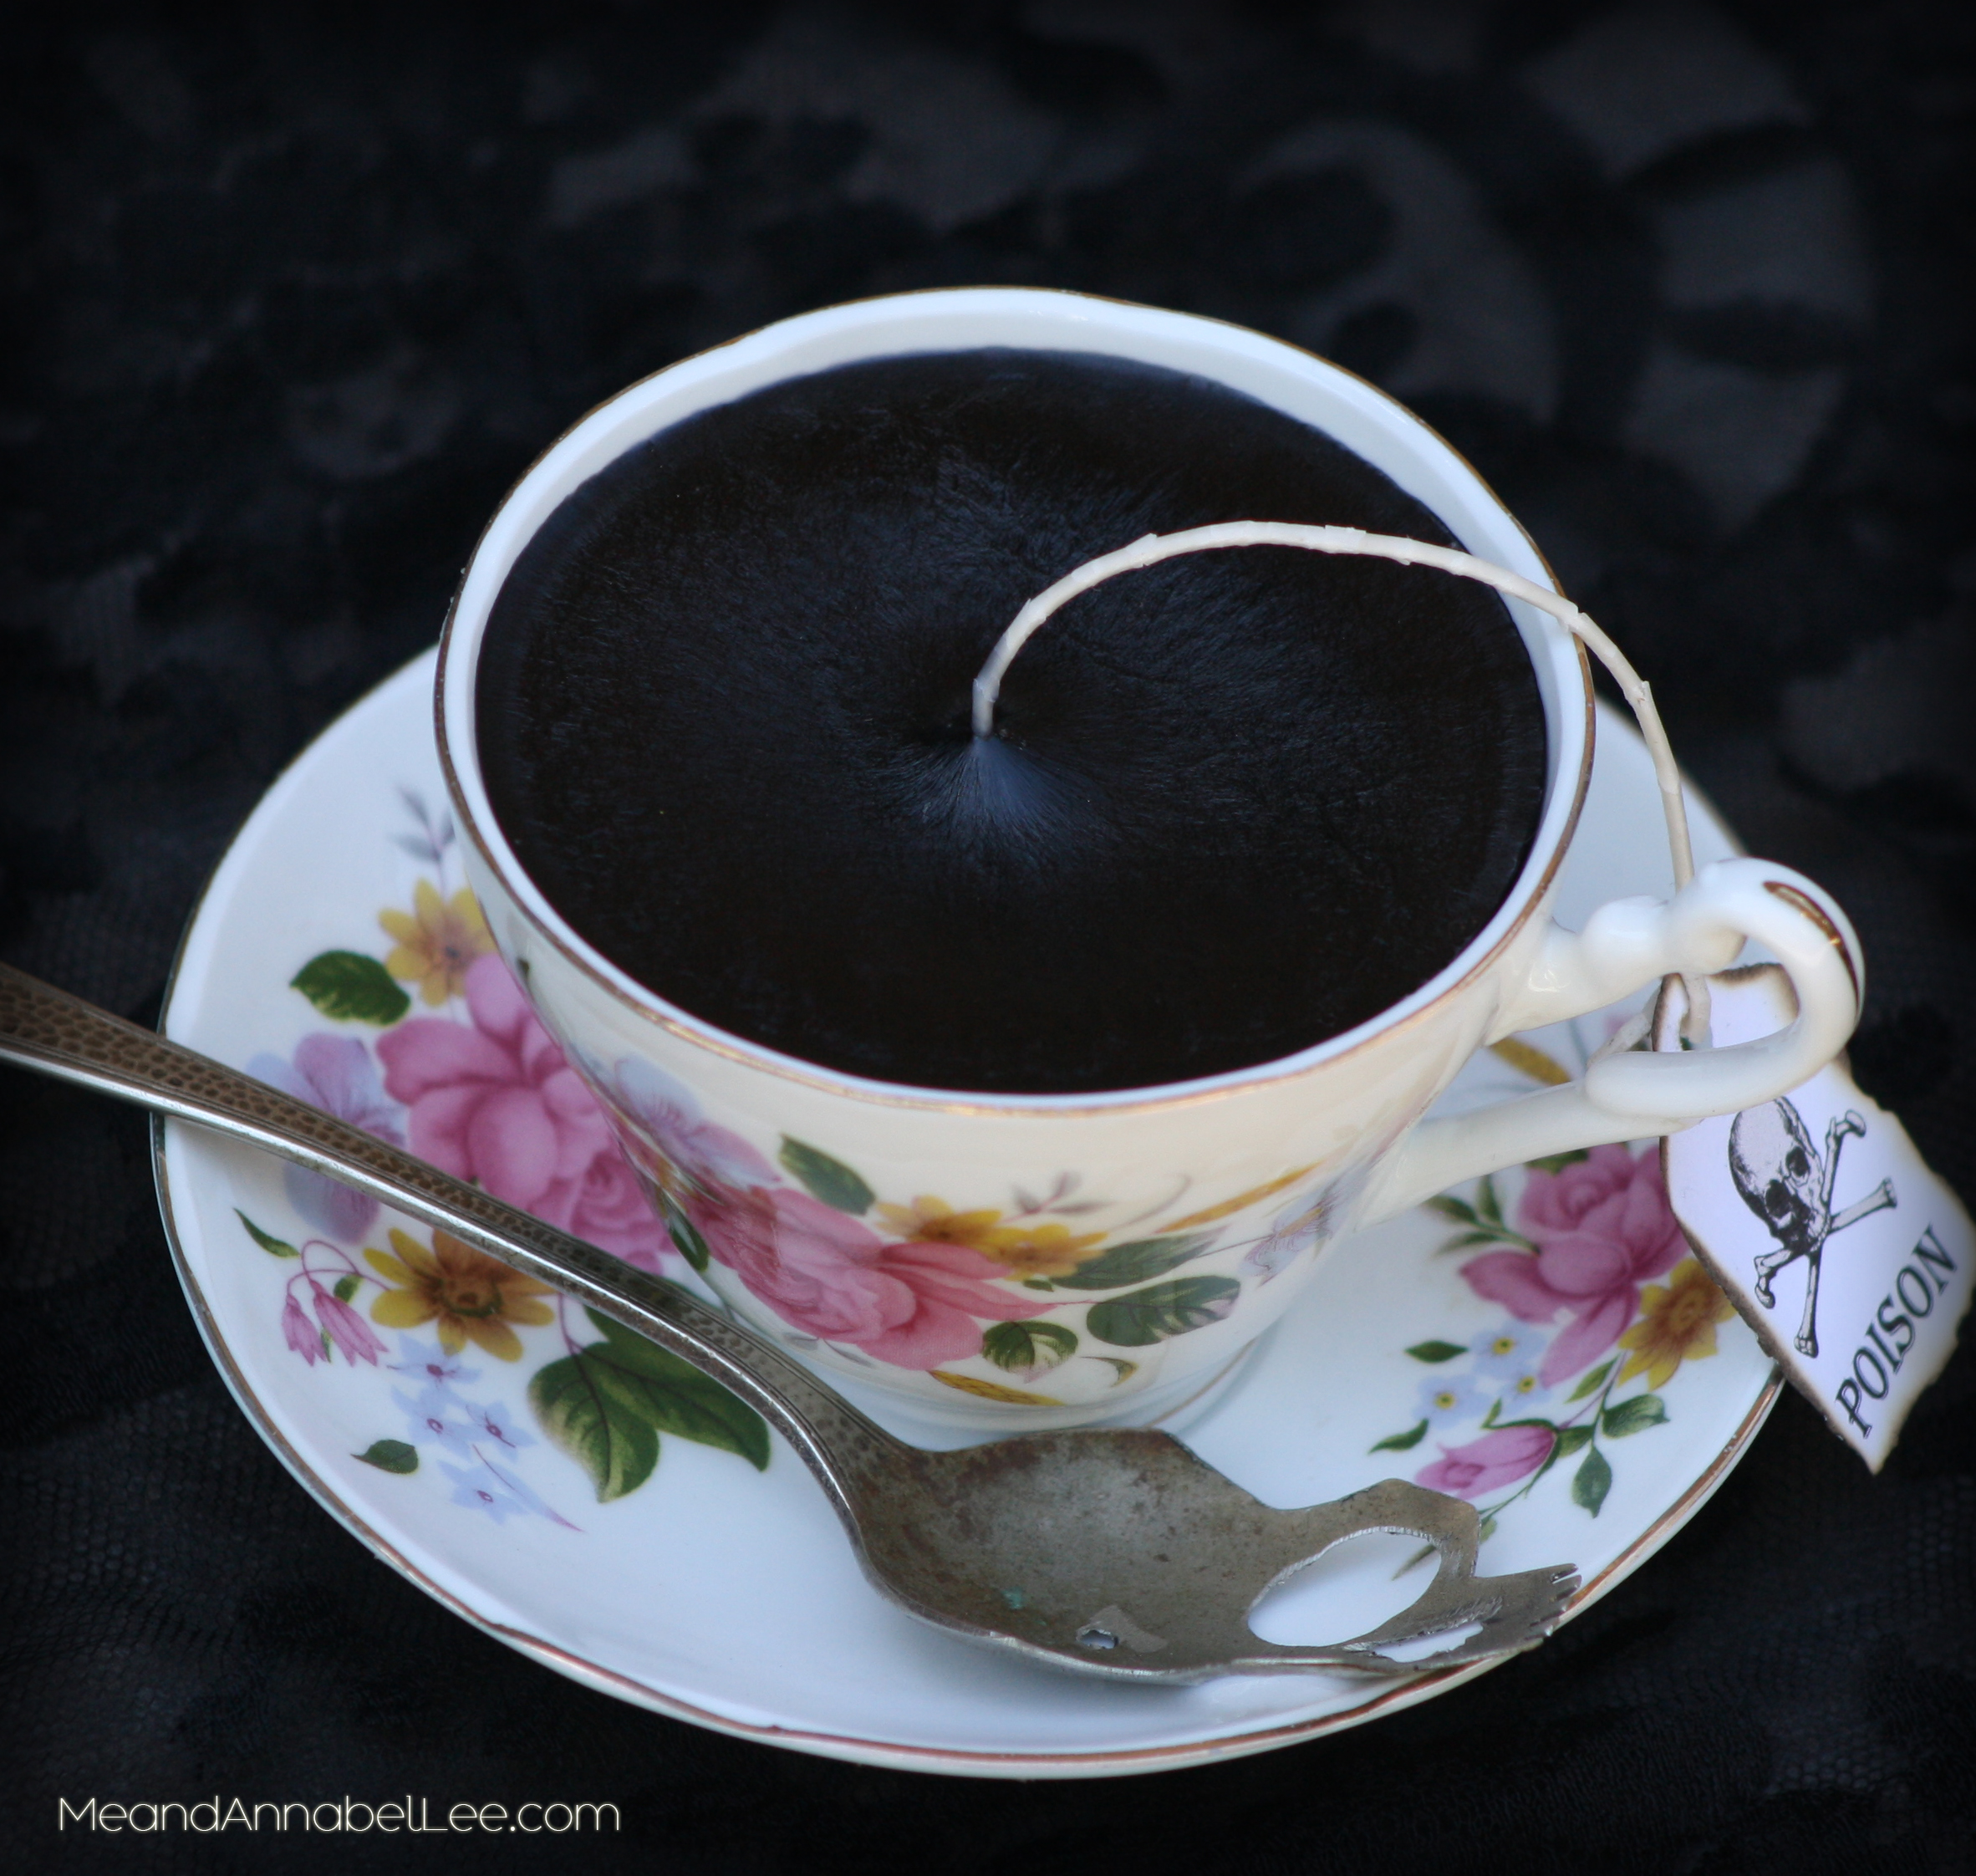 DIY Victorian Gothic Black Tea Cup Candles - Goth It Yourself Candlemaking - How to Make Candles - Vintage Tea Cup Trash to Treasure - Alice in Wonderland Tea Party - www.MeandAnnabelLee.com - - Blog for all things Dark, Gothic, Victorian, & Weird